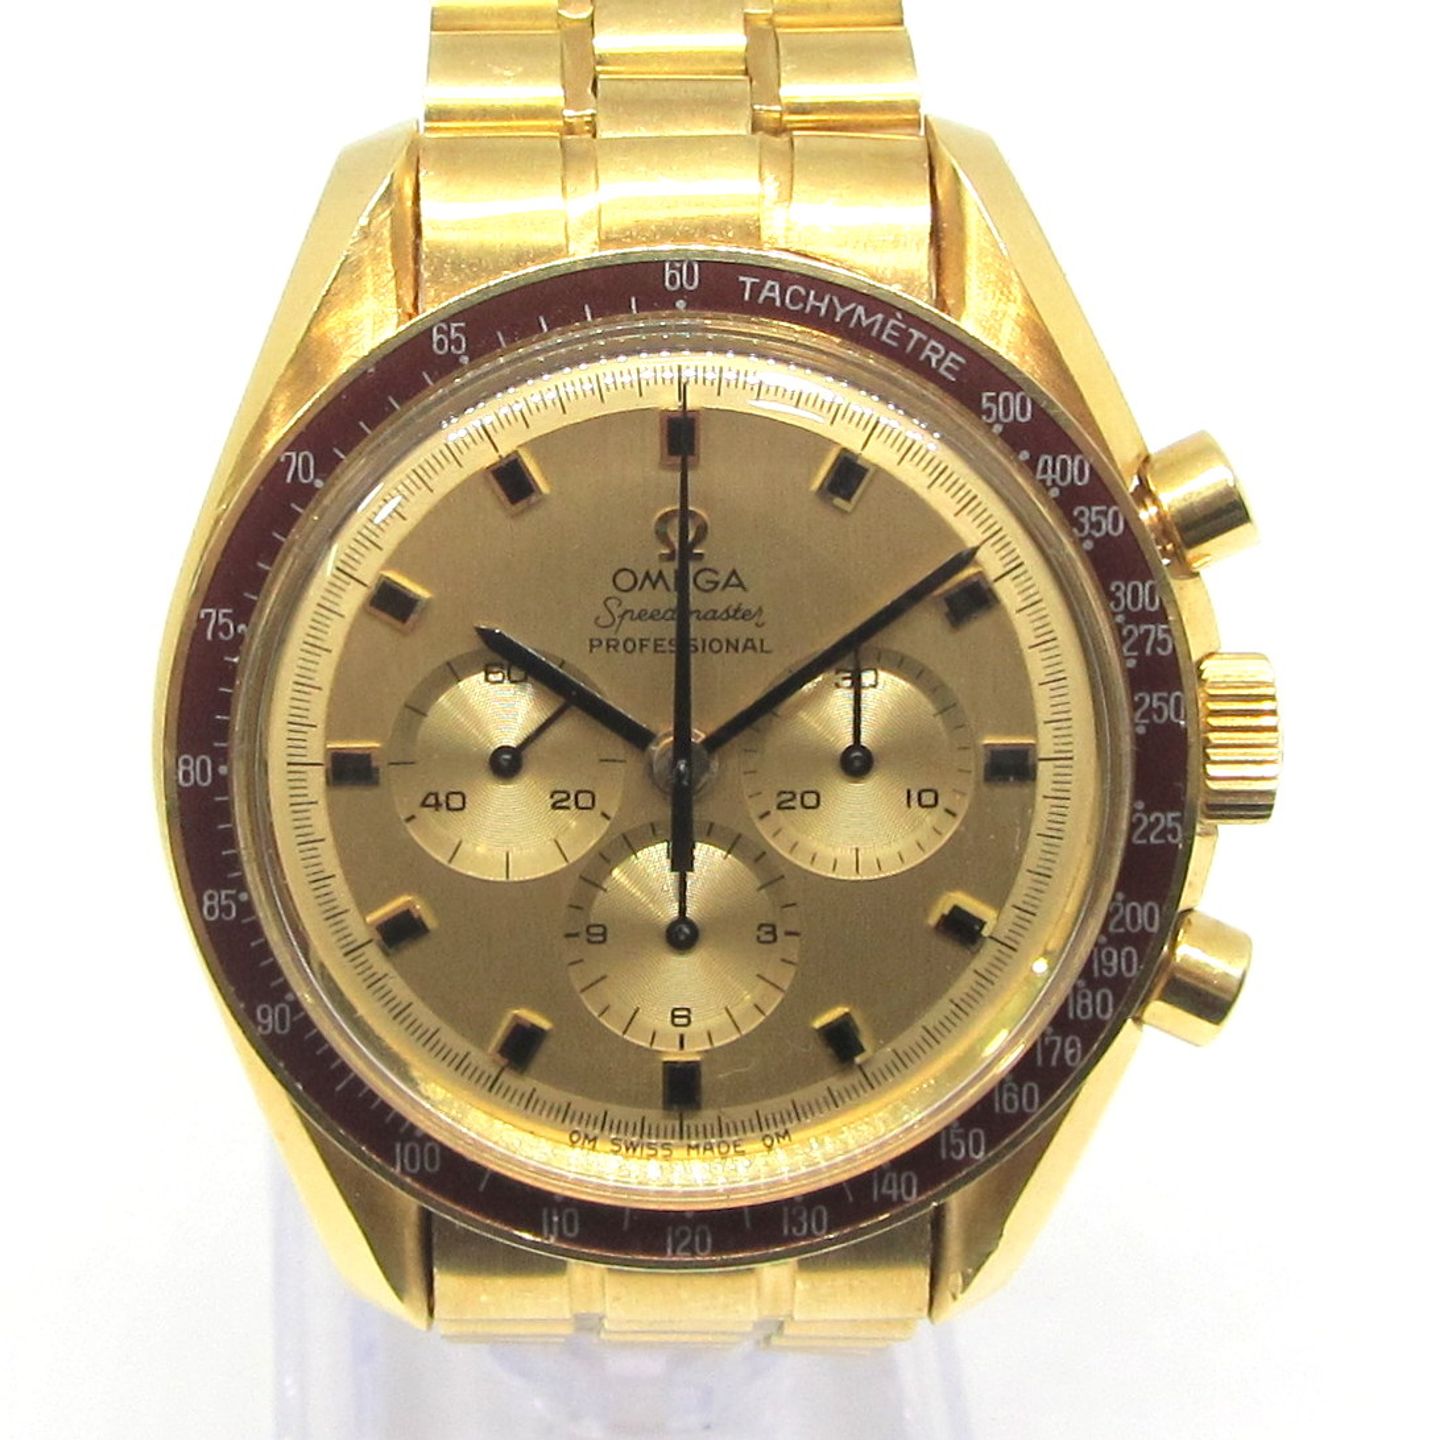 Omega Speedmaster Professional Moonwatch 145.022 (1973) - Gold dial 42 mm Yellow Gold case (1/6)